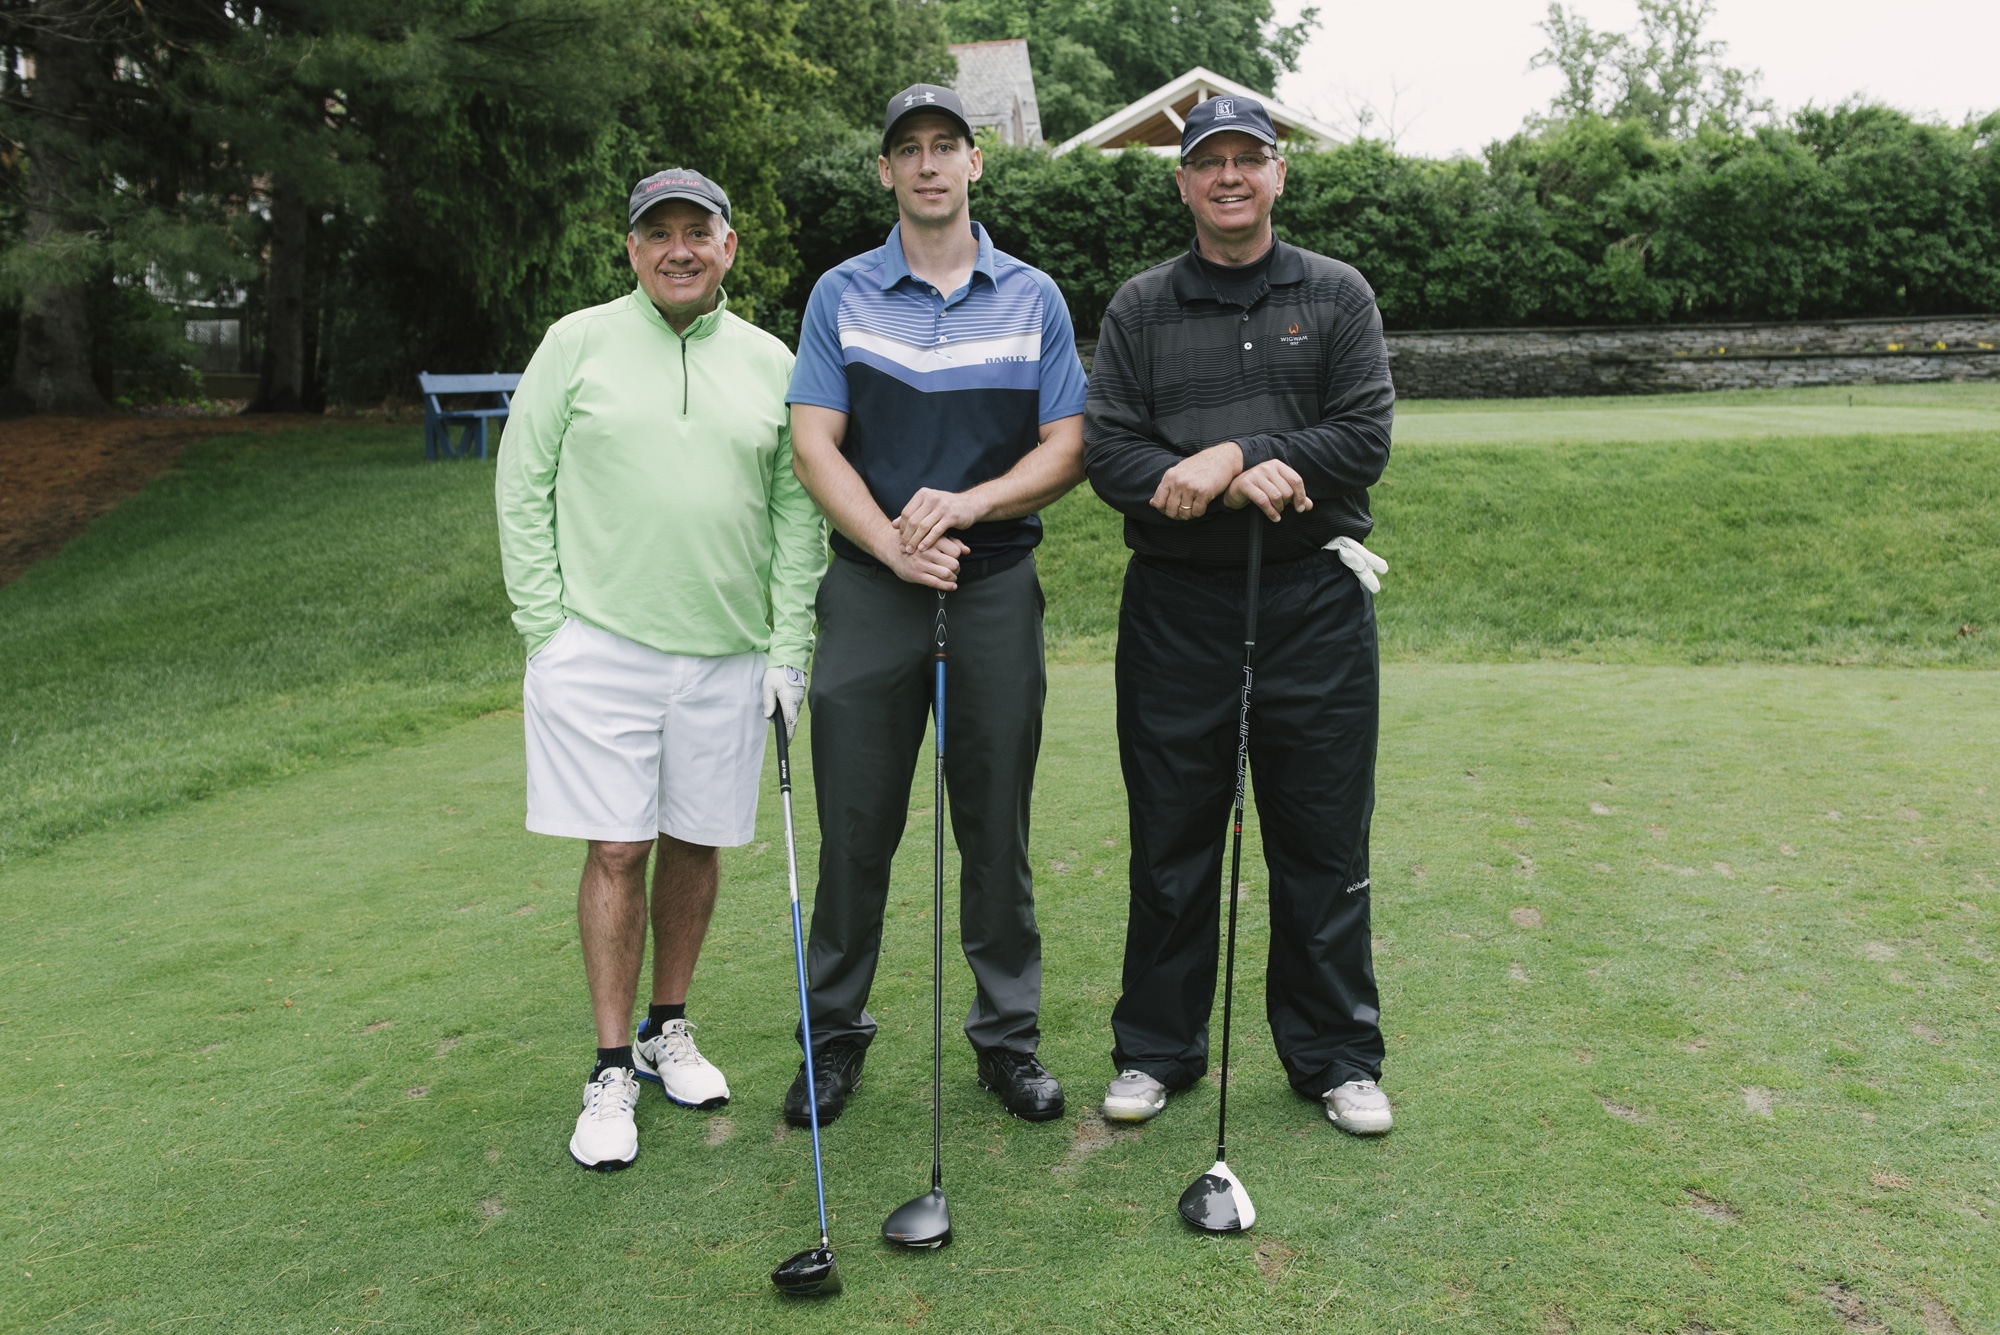 May 22, 2017 Community Options, Inc. Spring Golf Classic at Torresdale